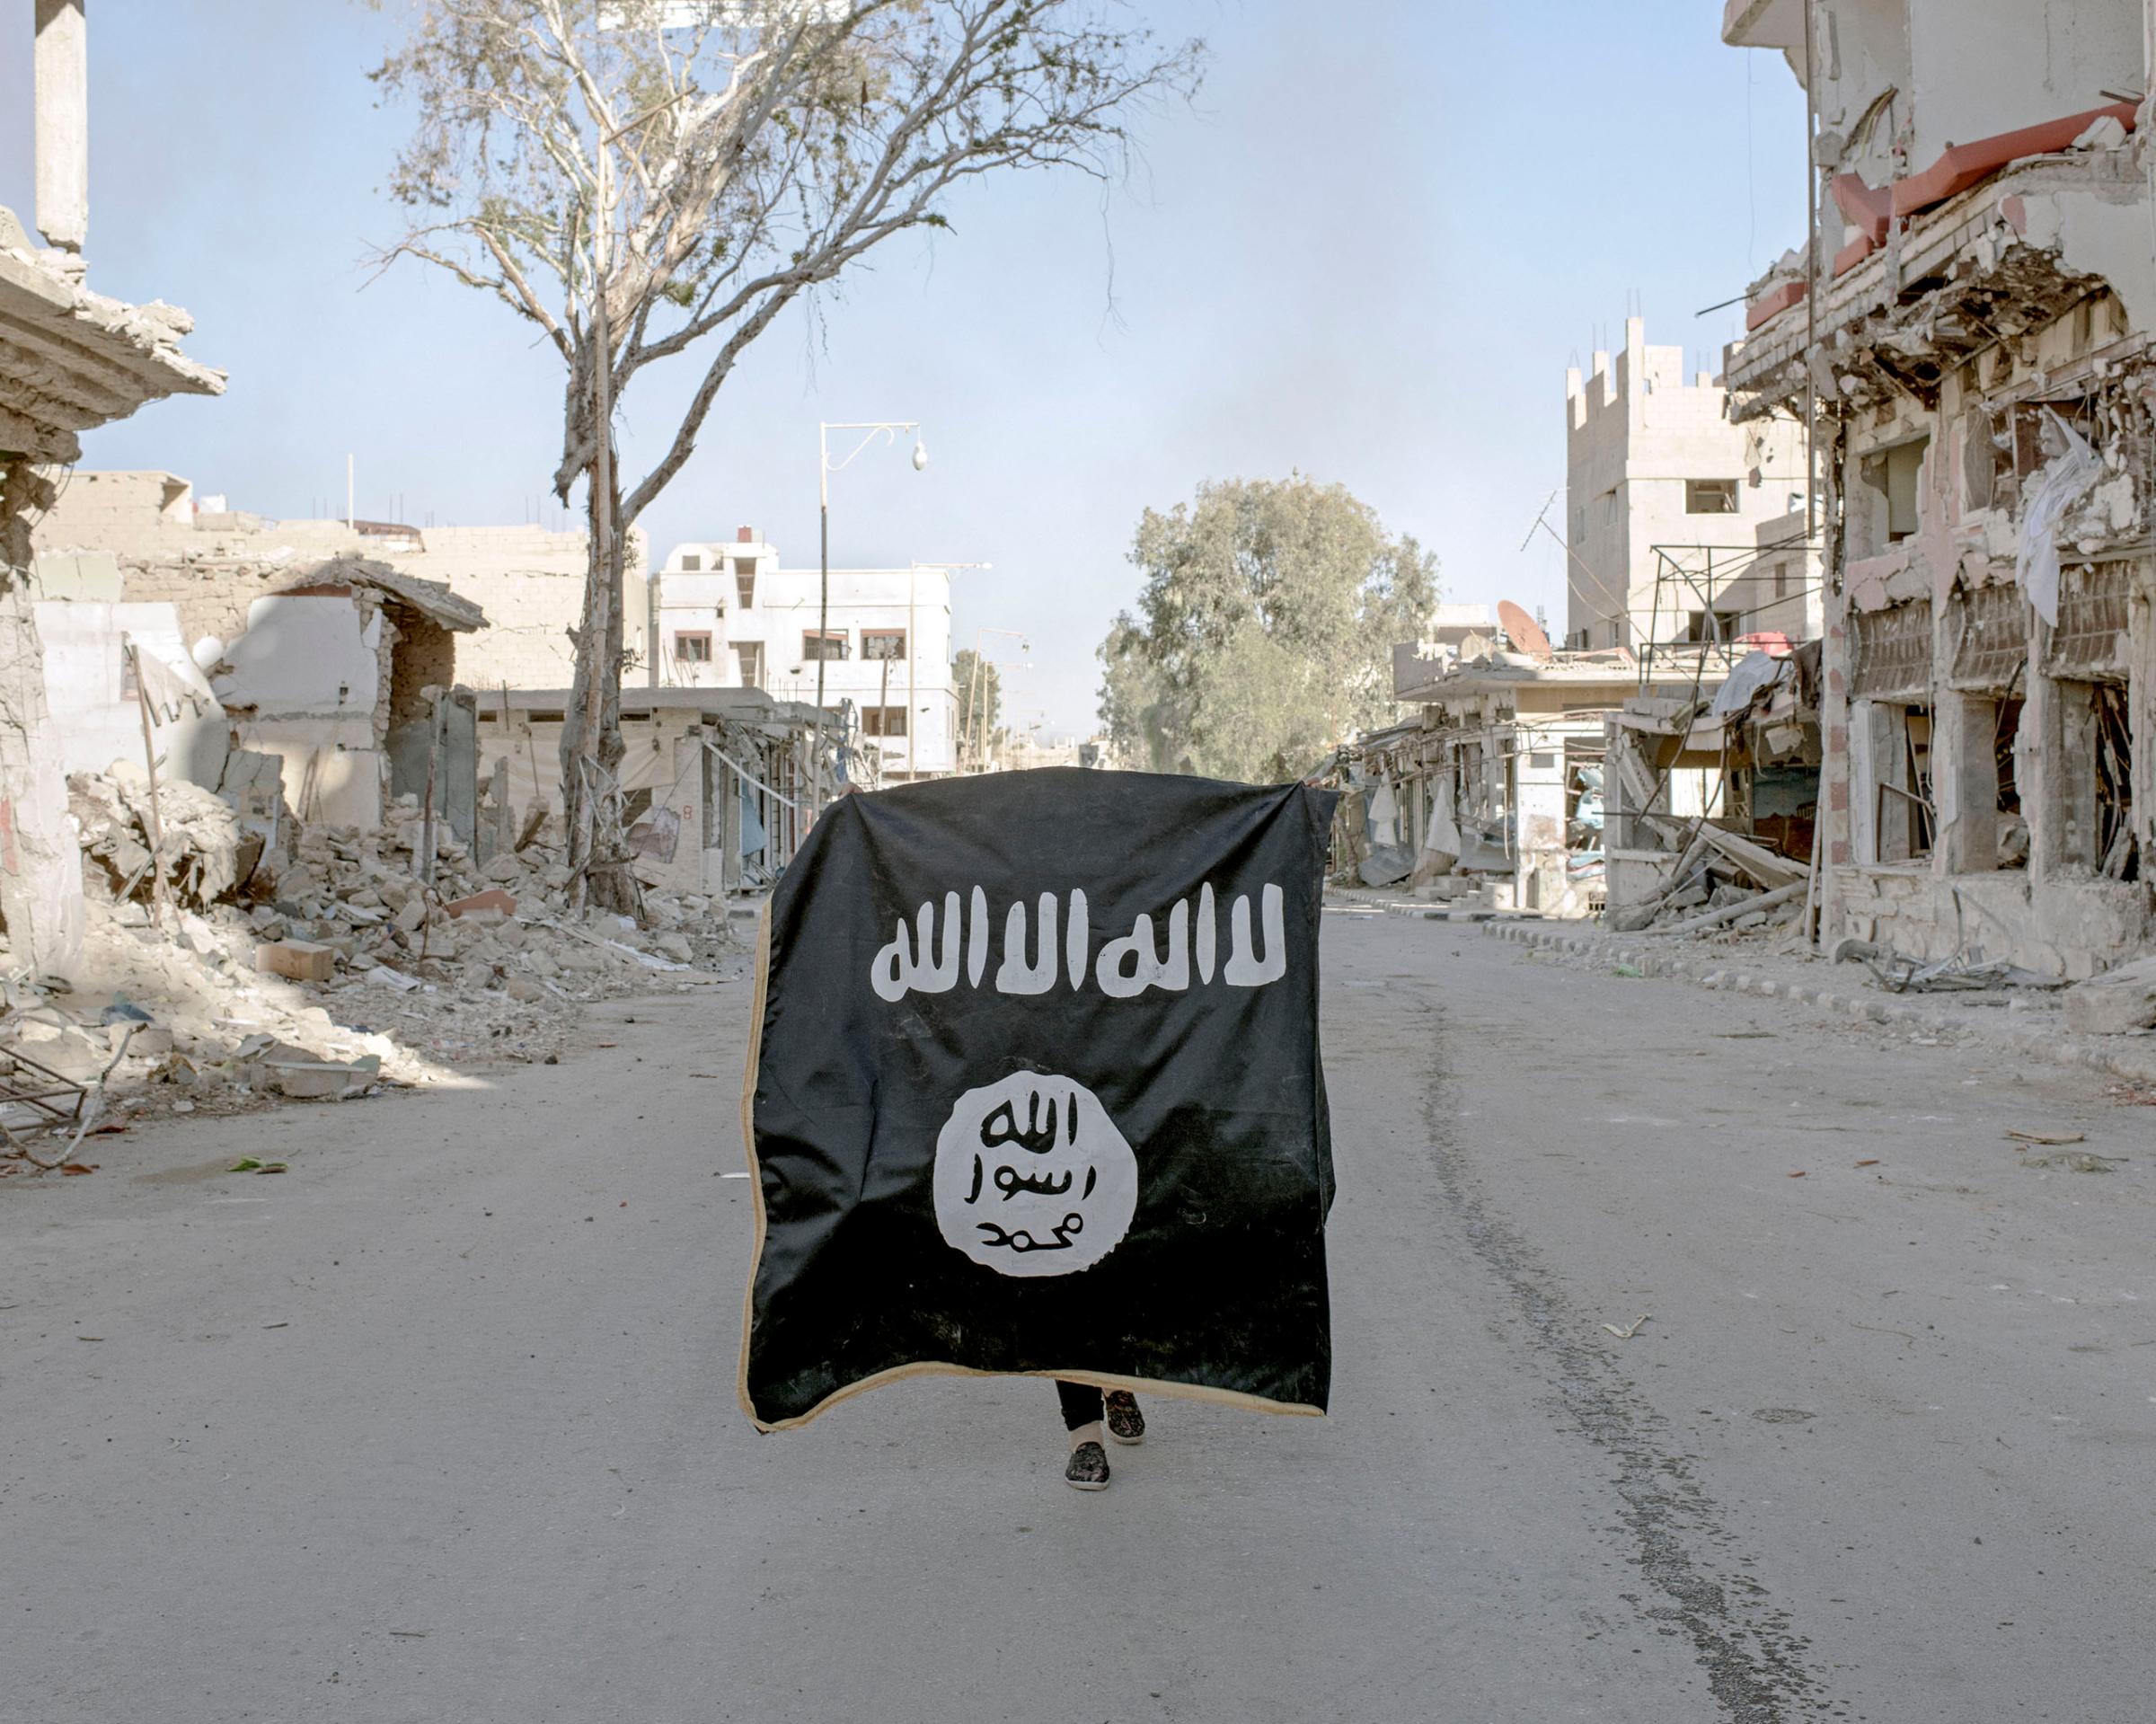 A volunteer soldier from the Syrian National Defense Forces holds up an ISIS flag, discovered in a street of downtown Palmyra, Syria, April 1, 2016.